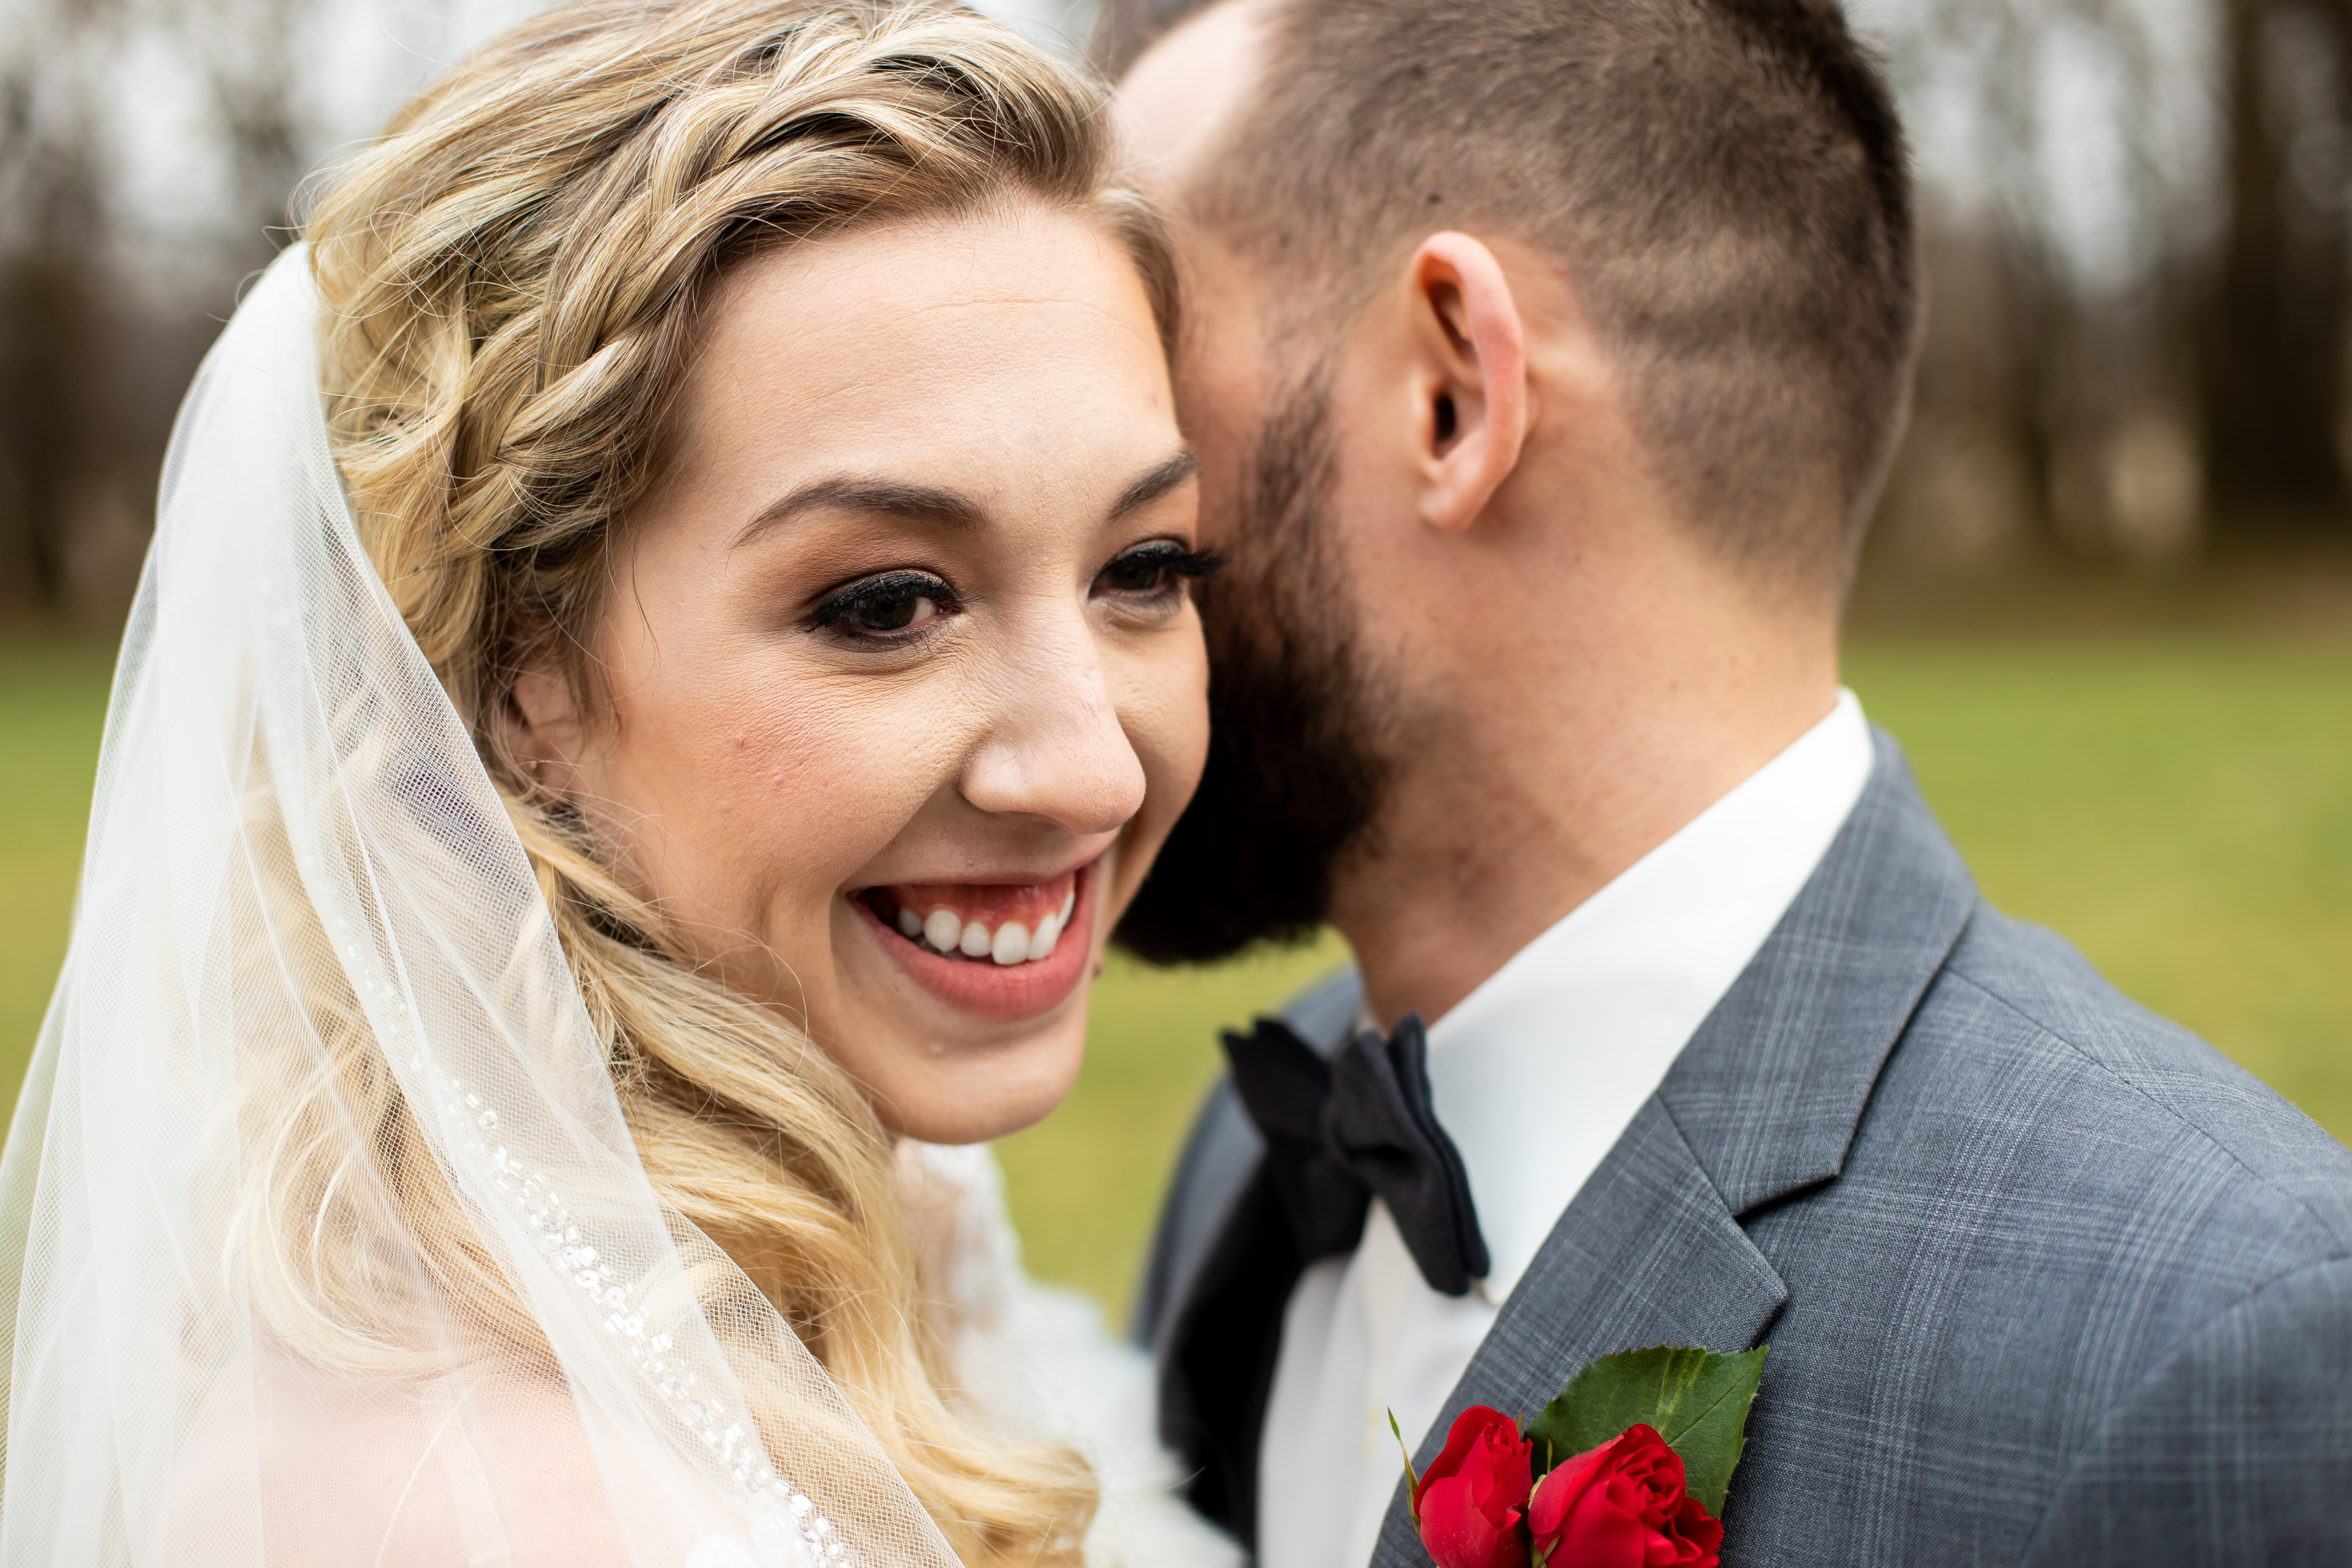 bride smiling while groom whispers in her ear